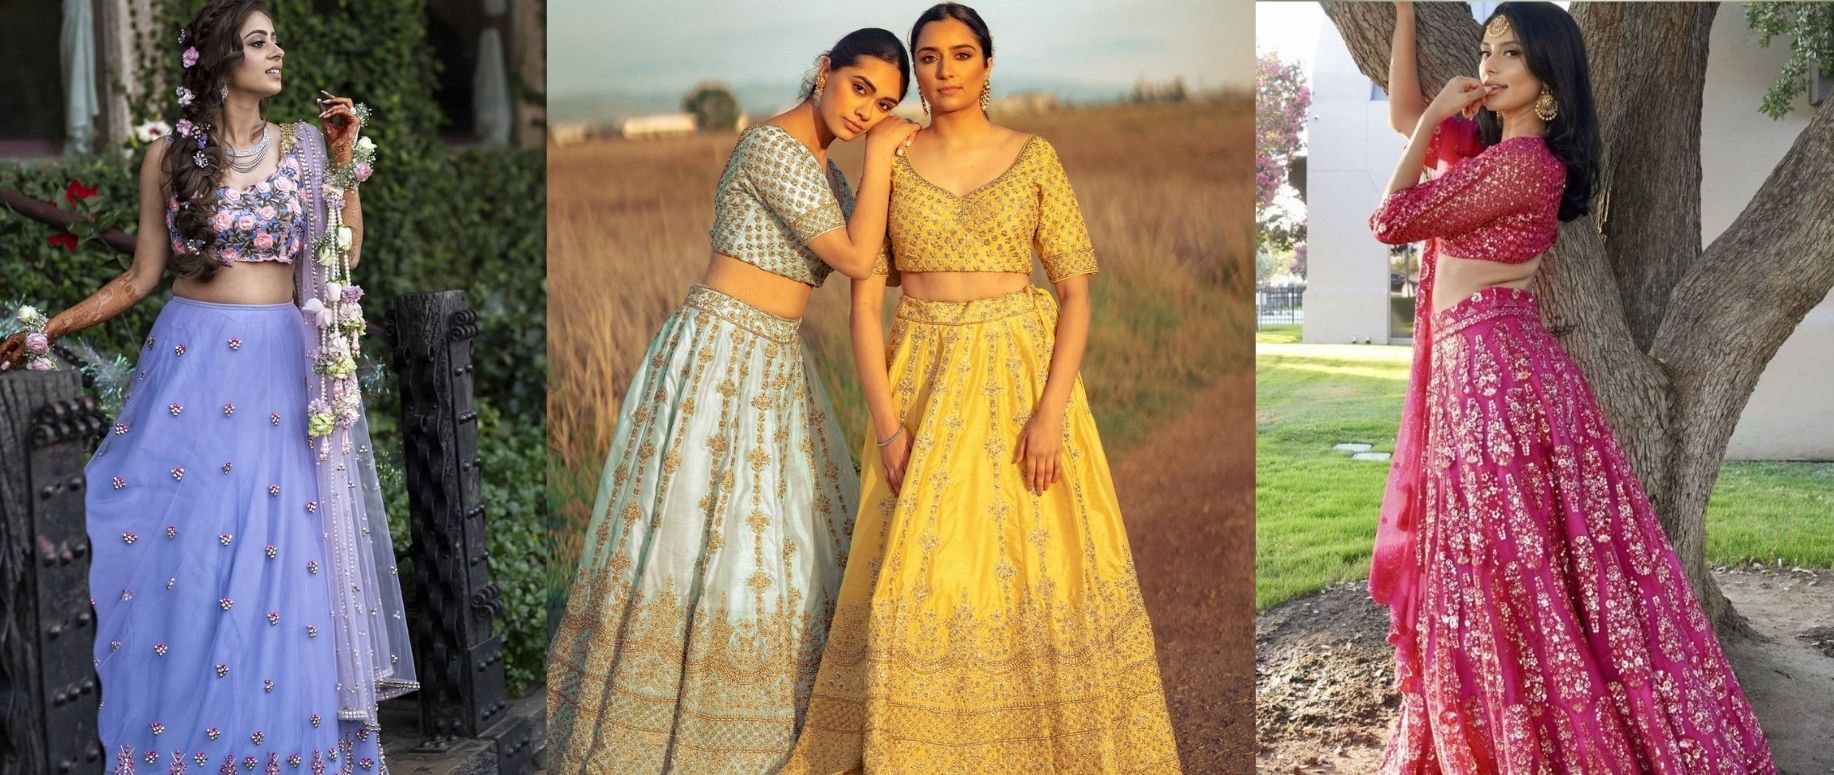 The Sister of the Bride Can Take a Look at These 10 Simple Lehenga Ideas  for the Wedding